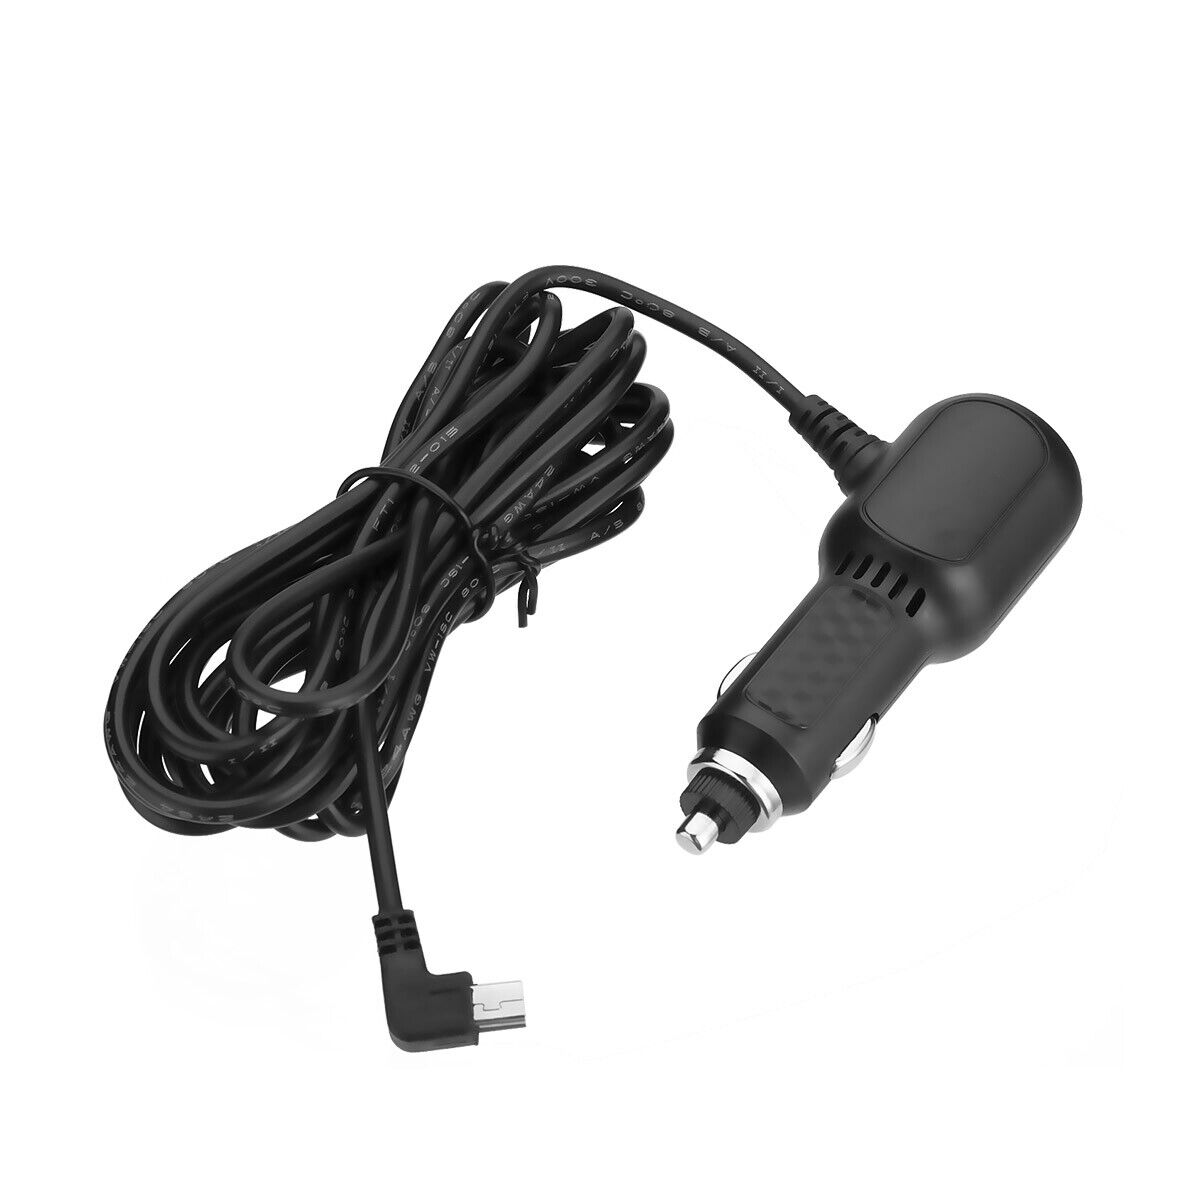 USB Car Charger Power Cord Cable for GARMIN nuvi Vehicle GPS 2595lmt 2597lmt